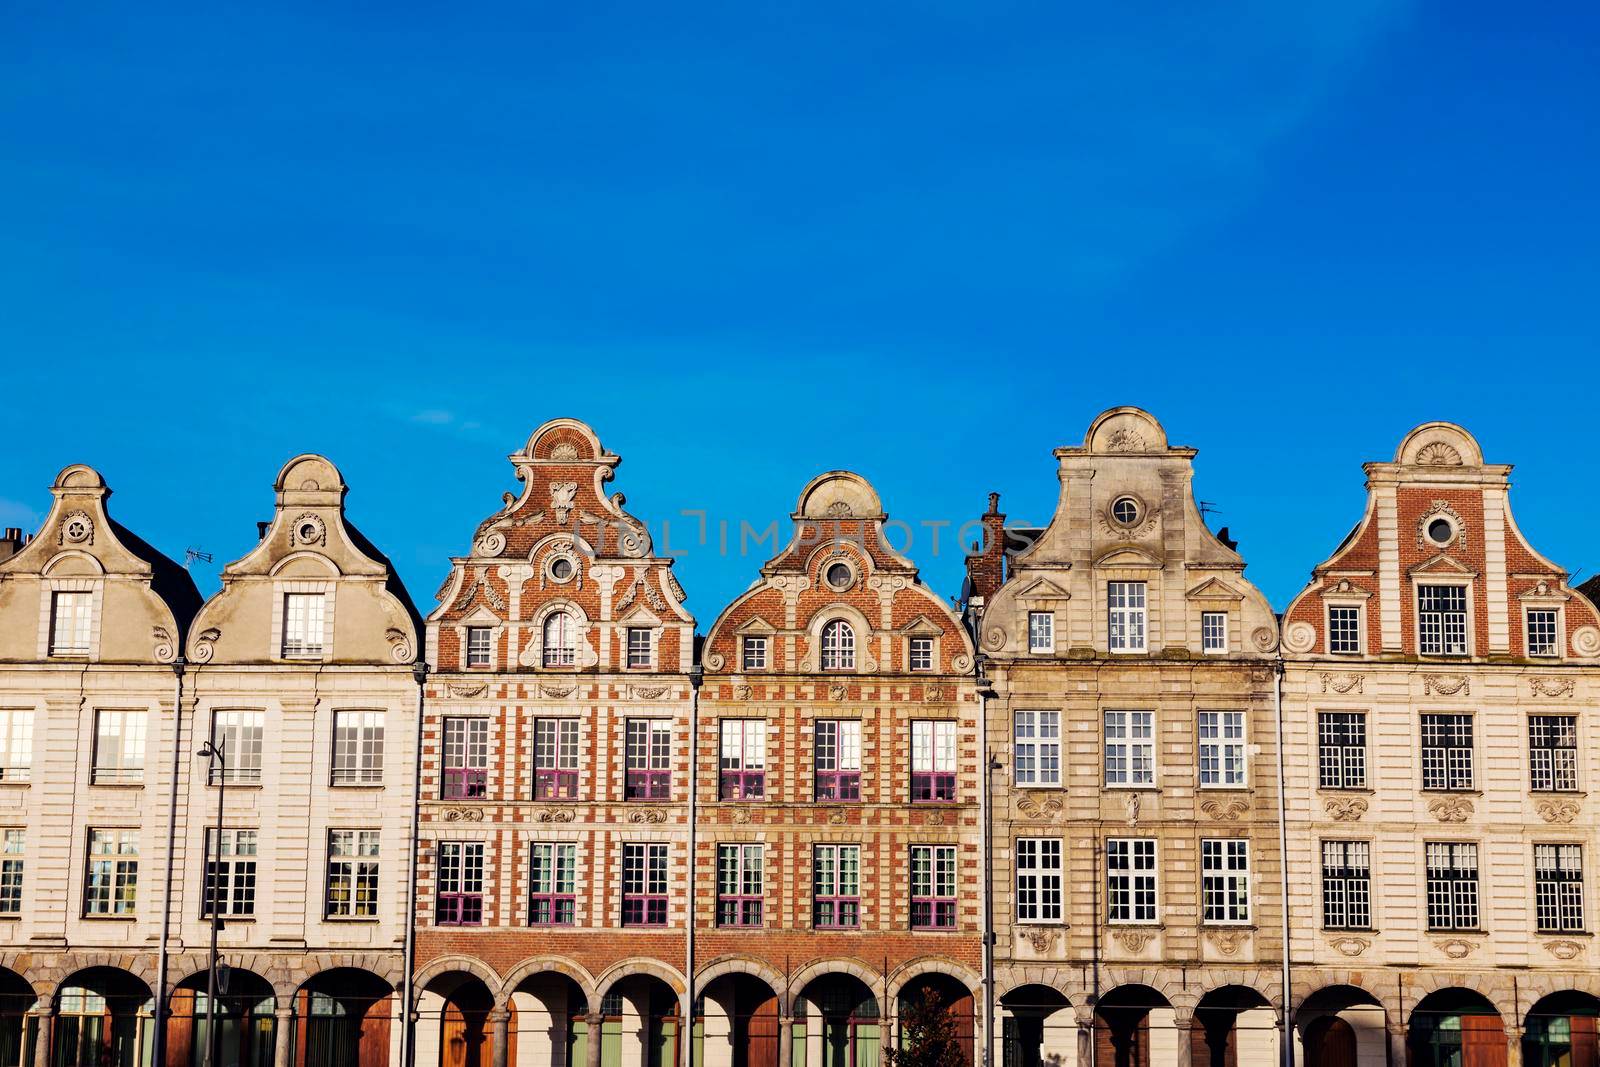 Architecture of Place des Heros in Arras by benkrut